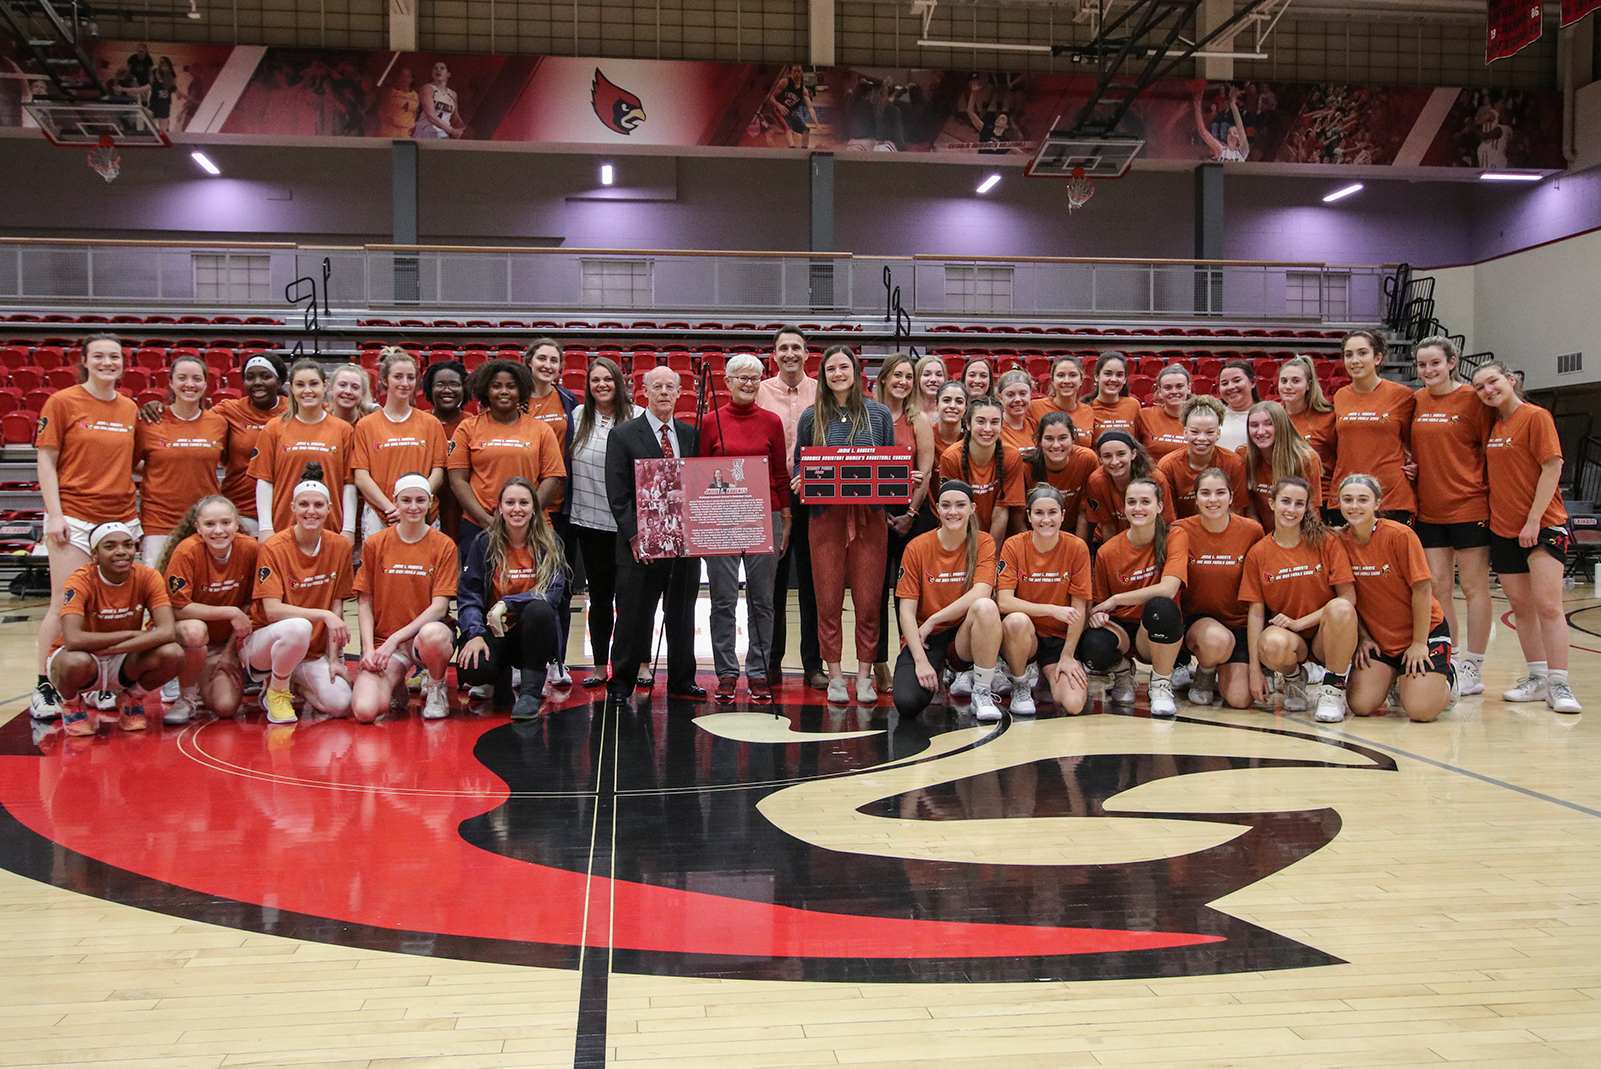 Bridget Power and Bob Roberts with the women's basketball team